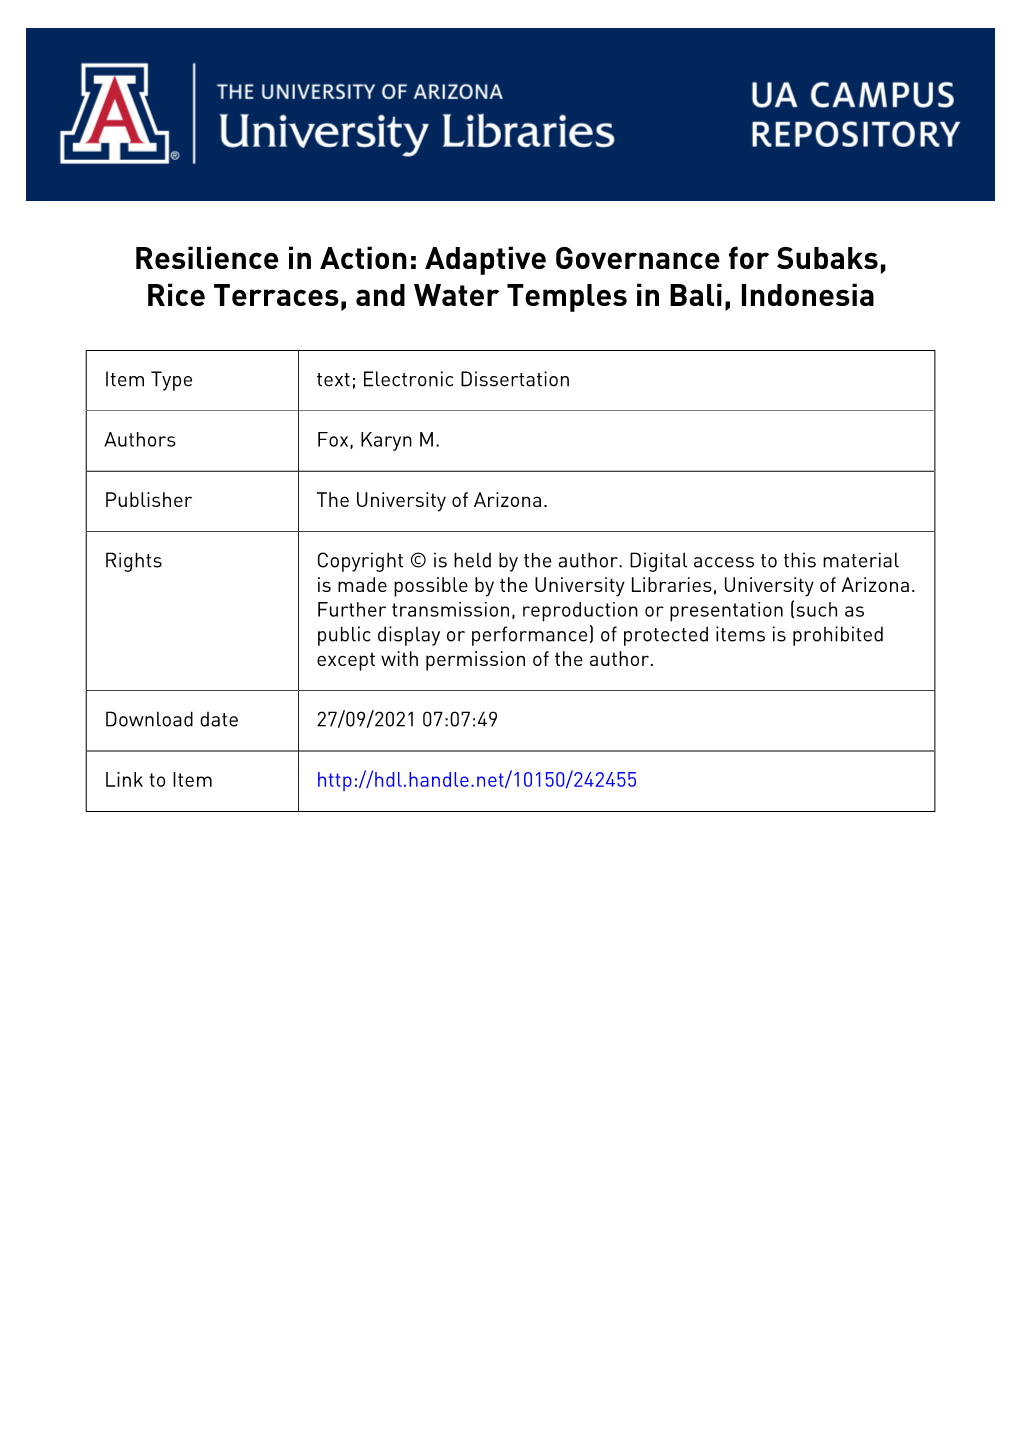 Adaptive Governance for Subak, Rice Terraces, and Water Temples in Bali, Indonesia